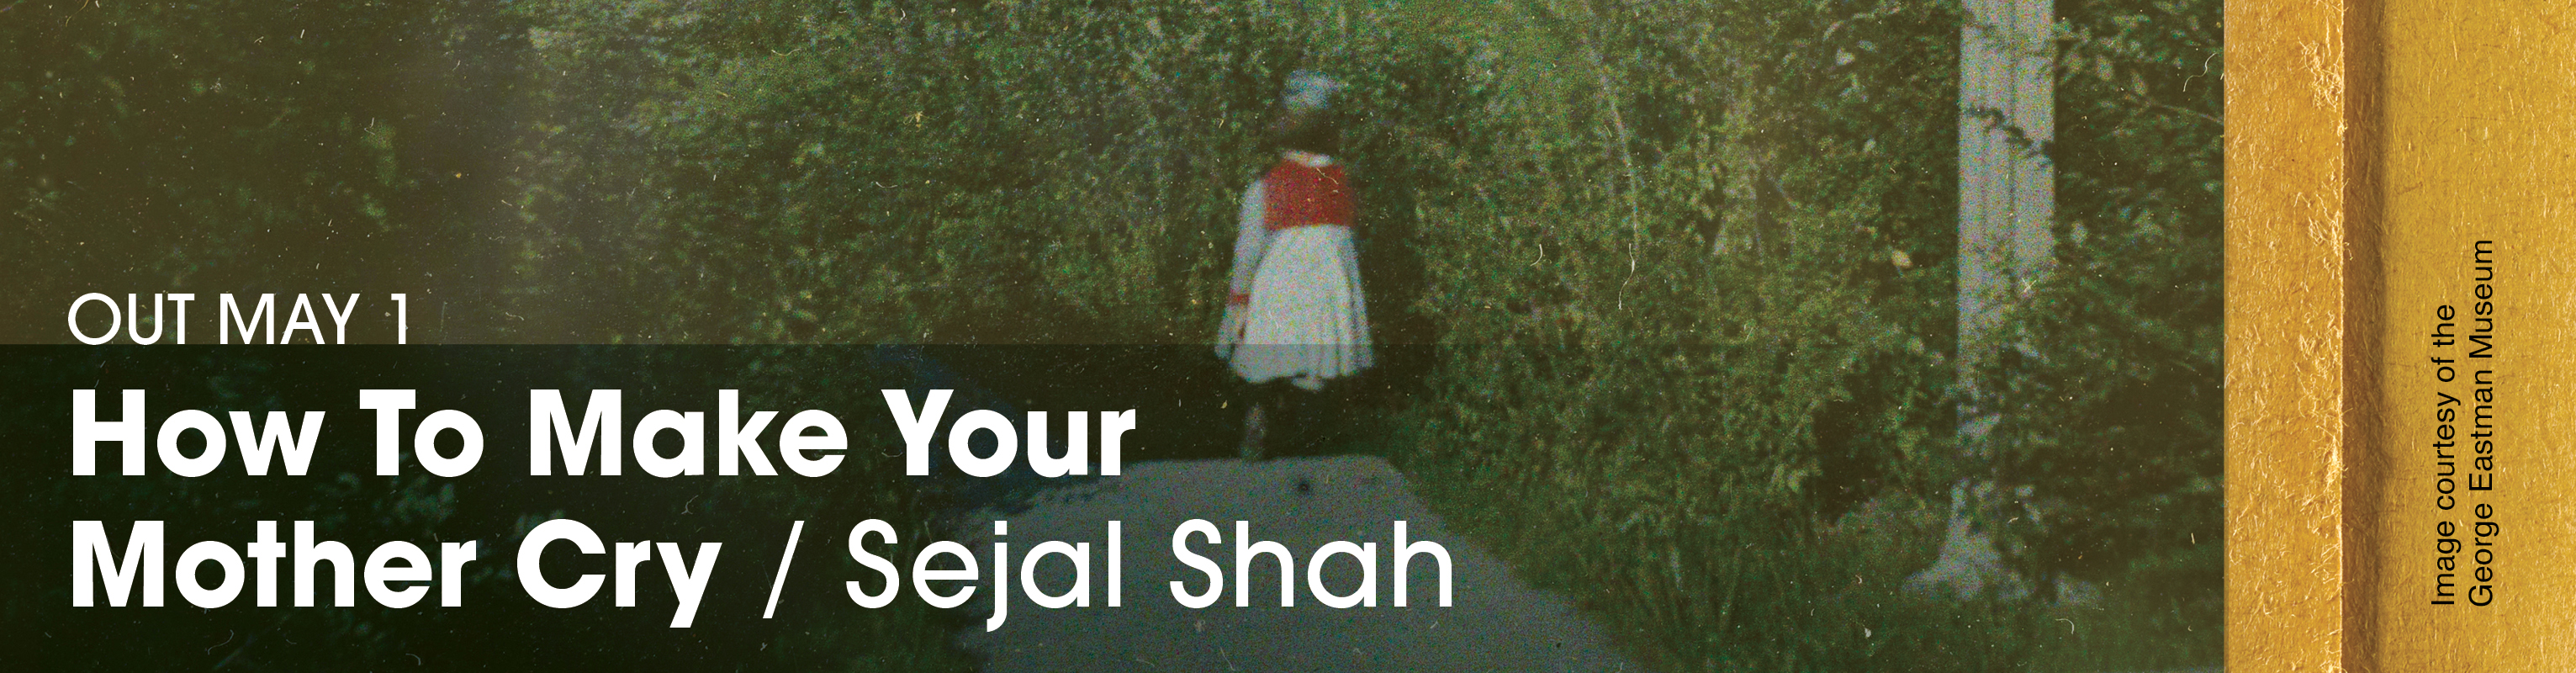 Cover image from How To Make Your Mother Cry by Sejal Shah of a girl in a red dress viewed from behind looking at a structure on a distant hilltop. Image courtesy of the George Eastman Museum 